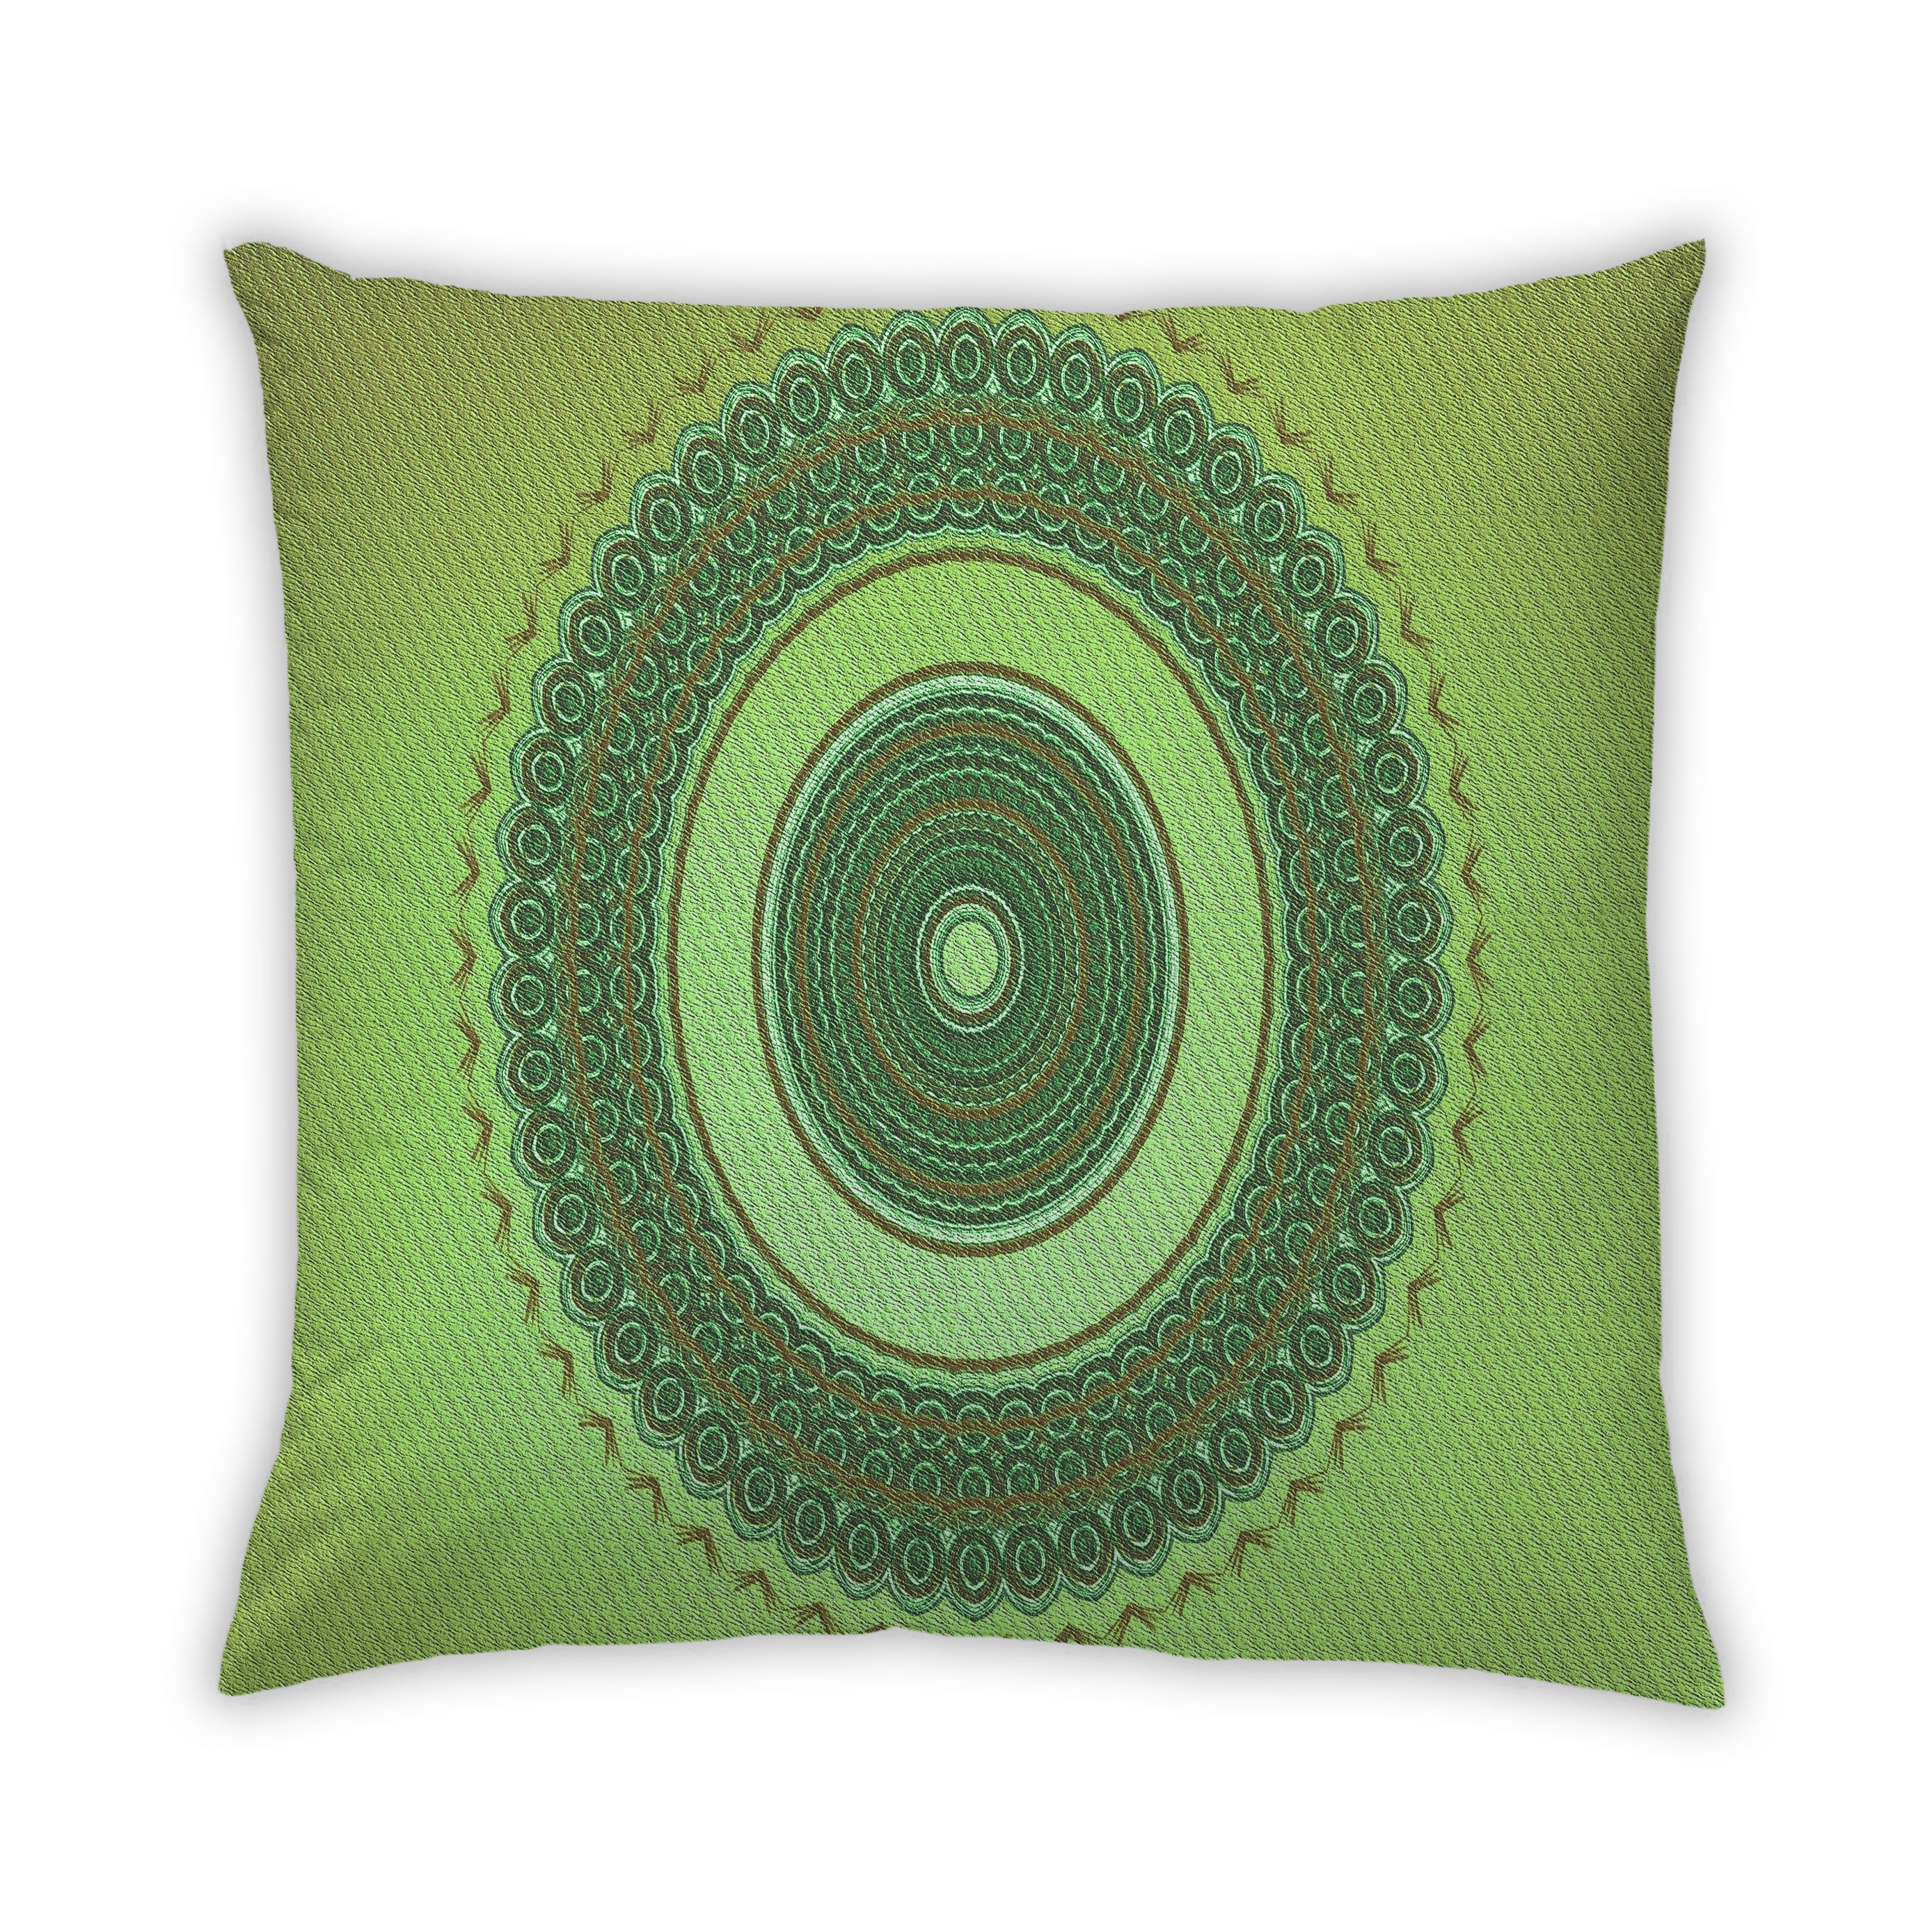 https://ak1.ostkcdn.com/images/products/is/images/direct/71b0ace482824313e44c217b5e5a26d25c97265d/Ahgly-Company-Patterned-Green-Throw-Pillow.jpg